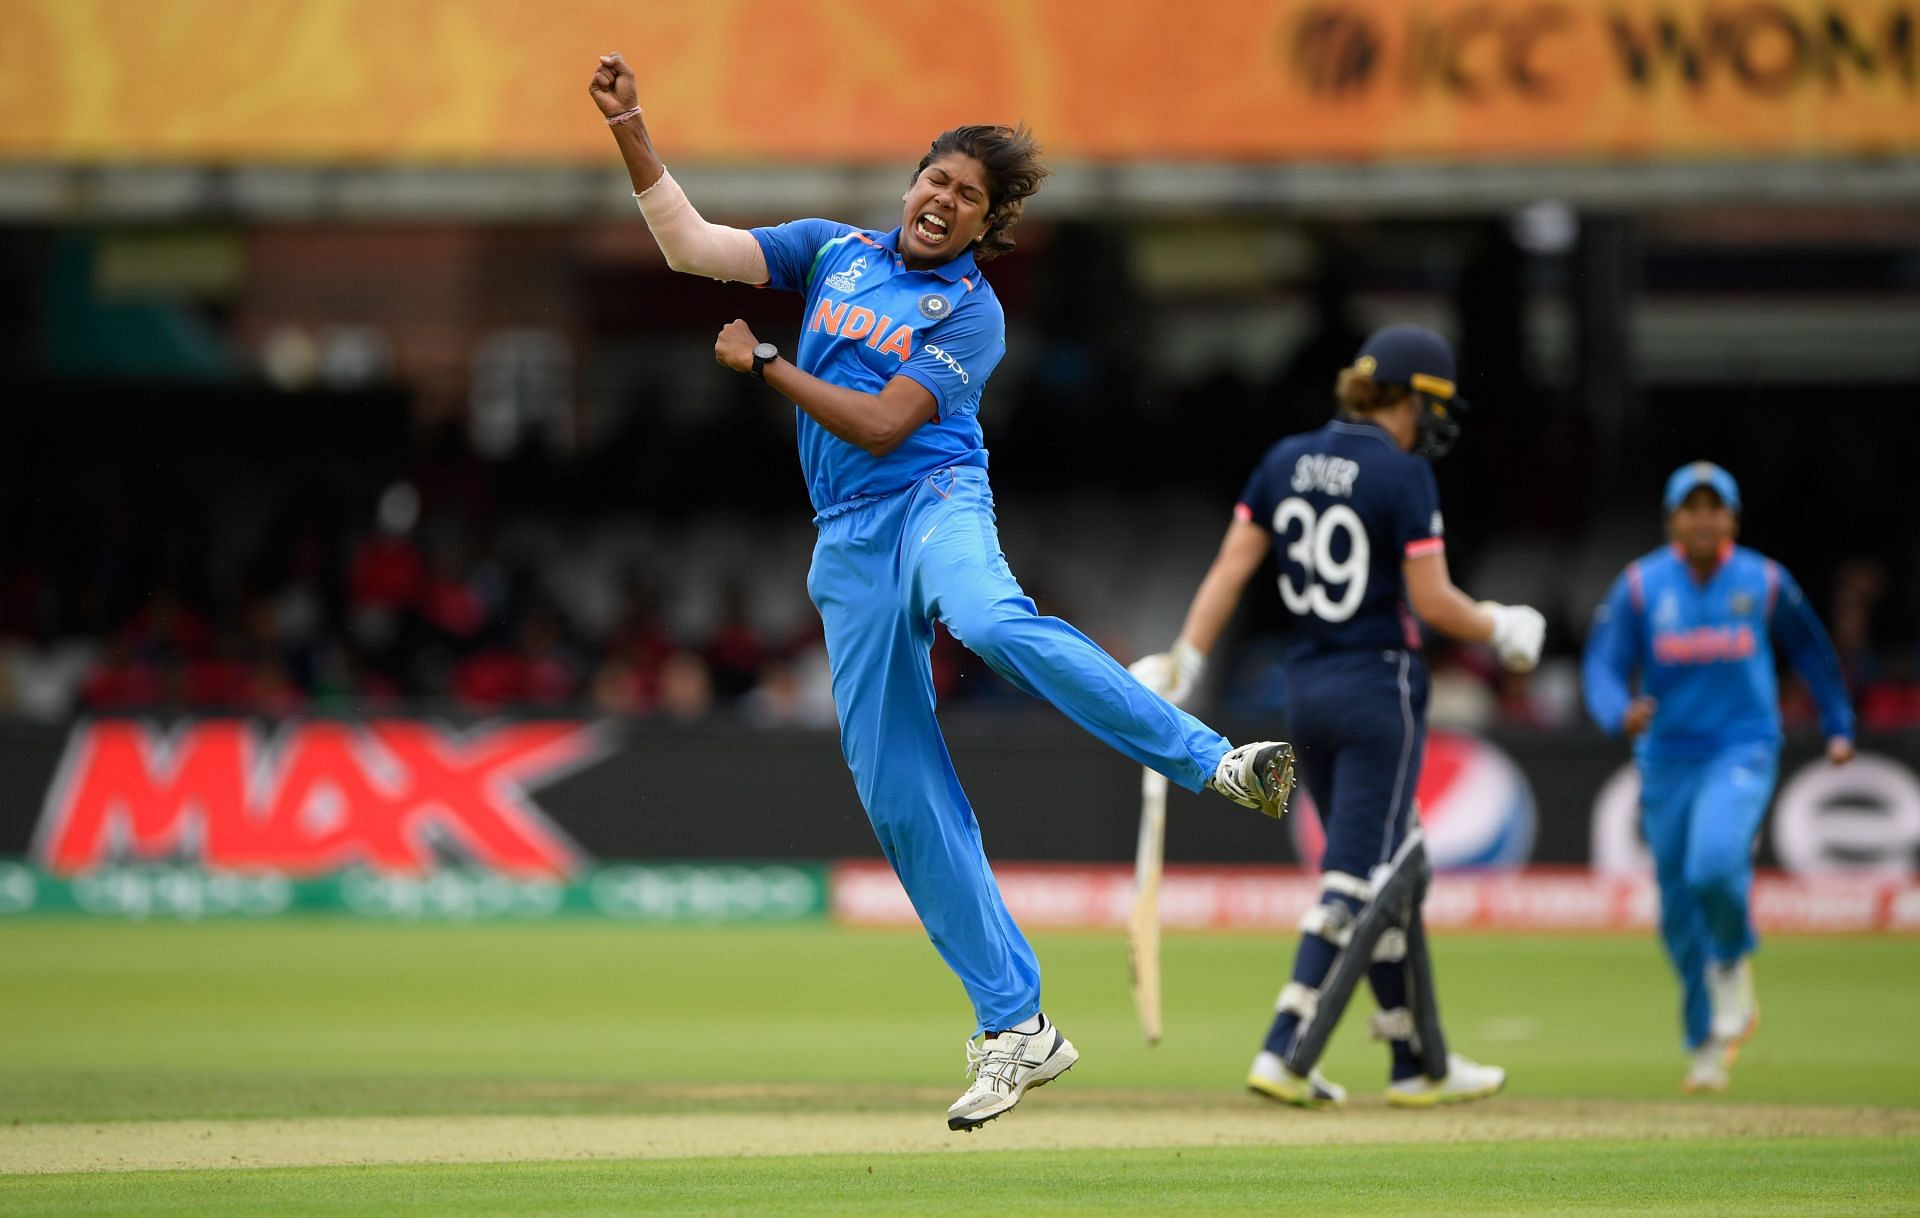 Jhulan Goswami was an integral member of the Indian team that reached the 2017 World Cup final.